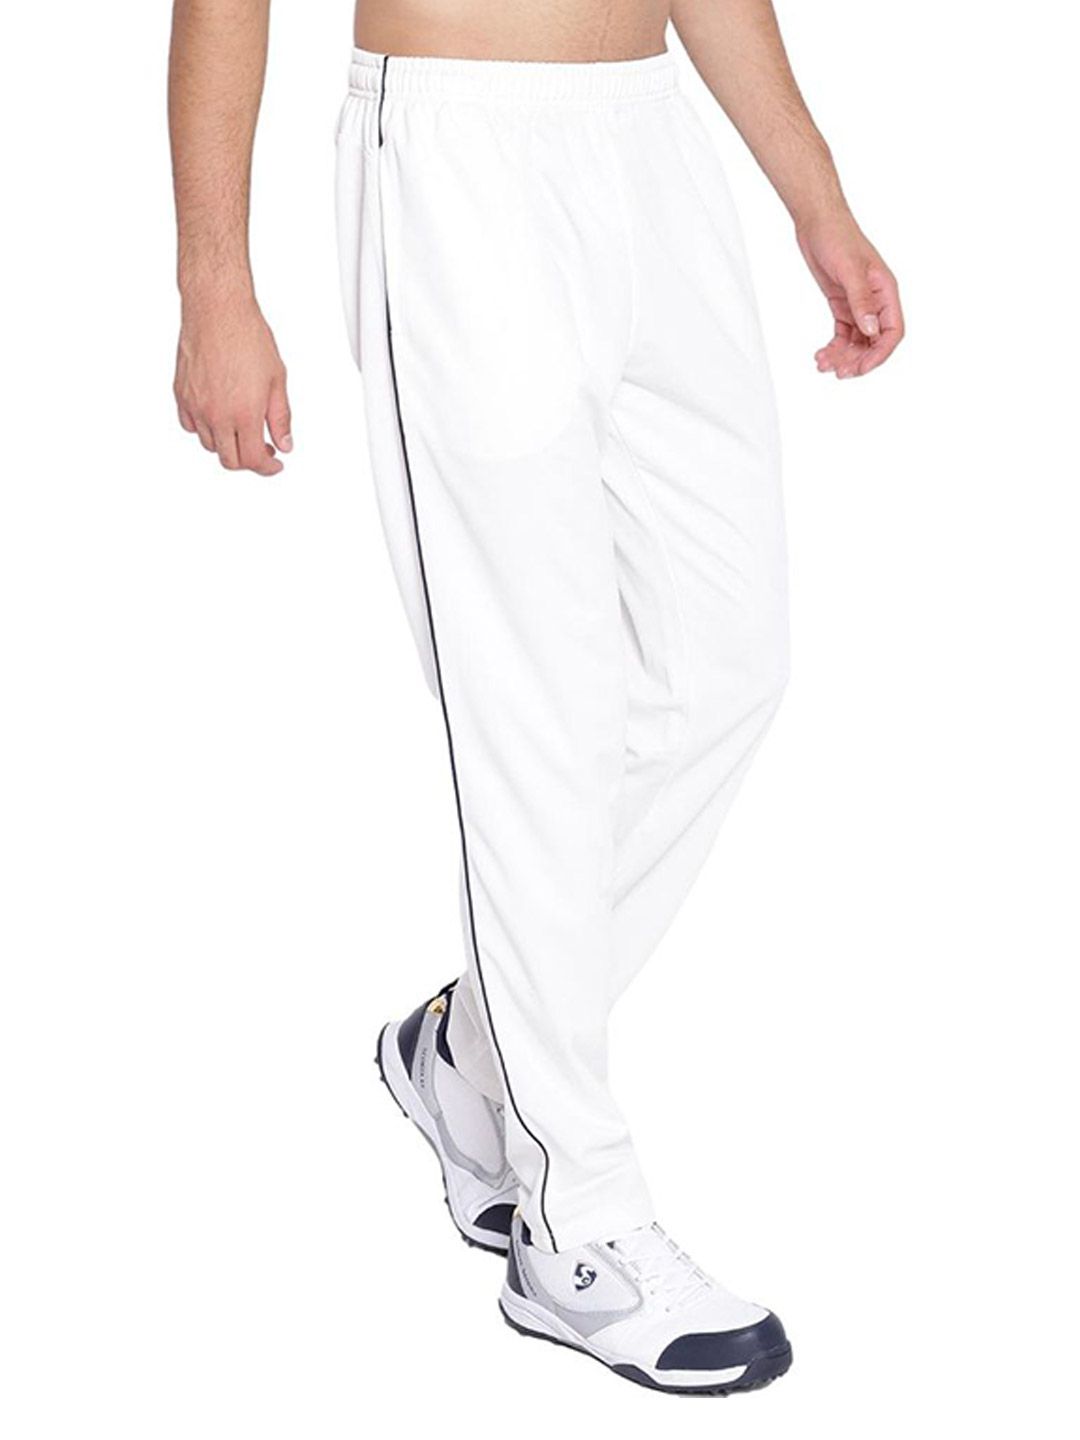 Cricket Track Pants  Custom Made Cricket Trousers Clothing